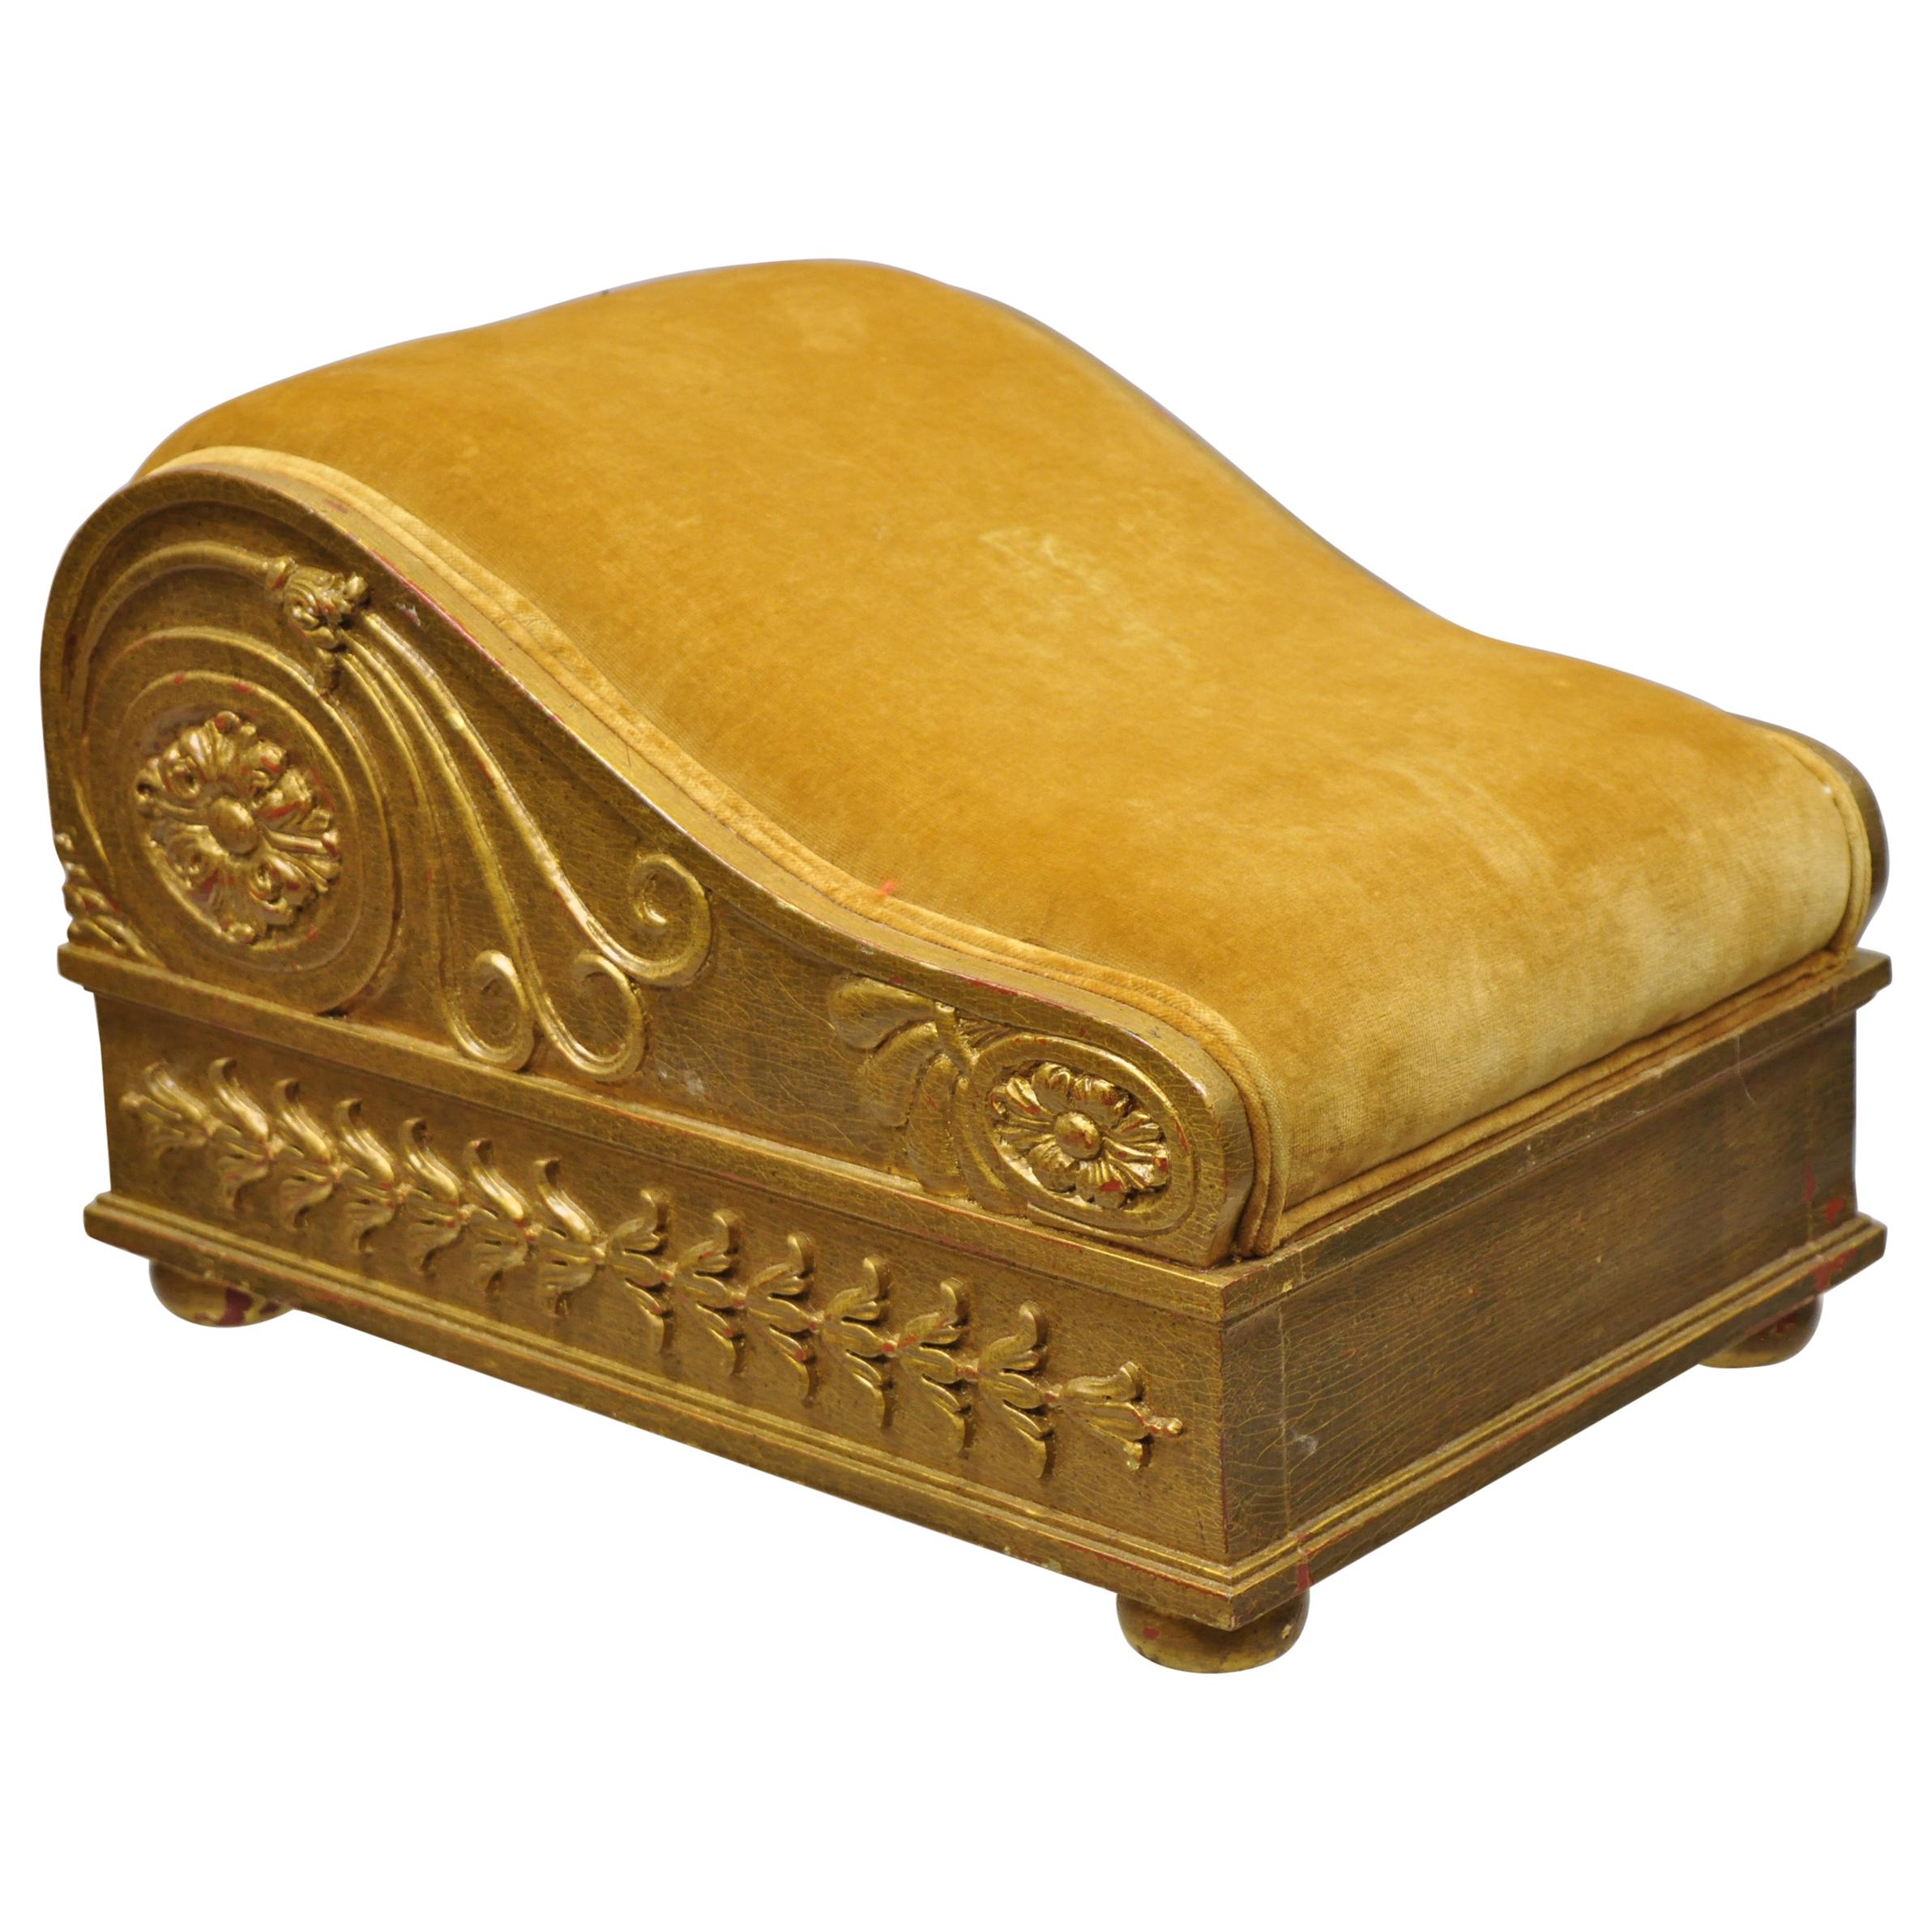 Vintage Italian Empire Style Gold Giltwood Swedish Gout Stool Footstool Ottoman For Sale